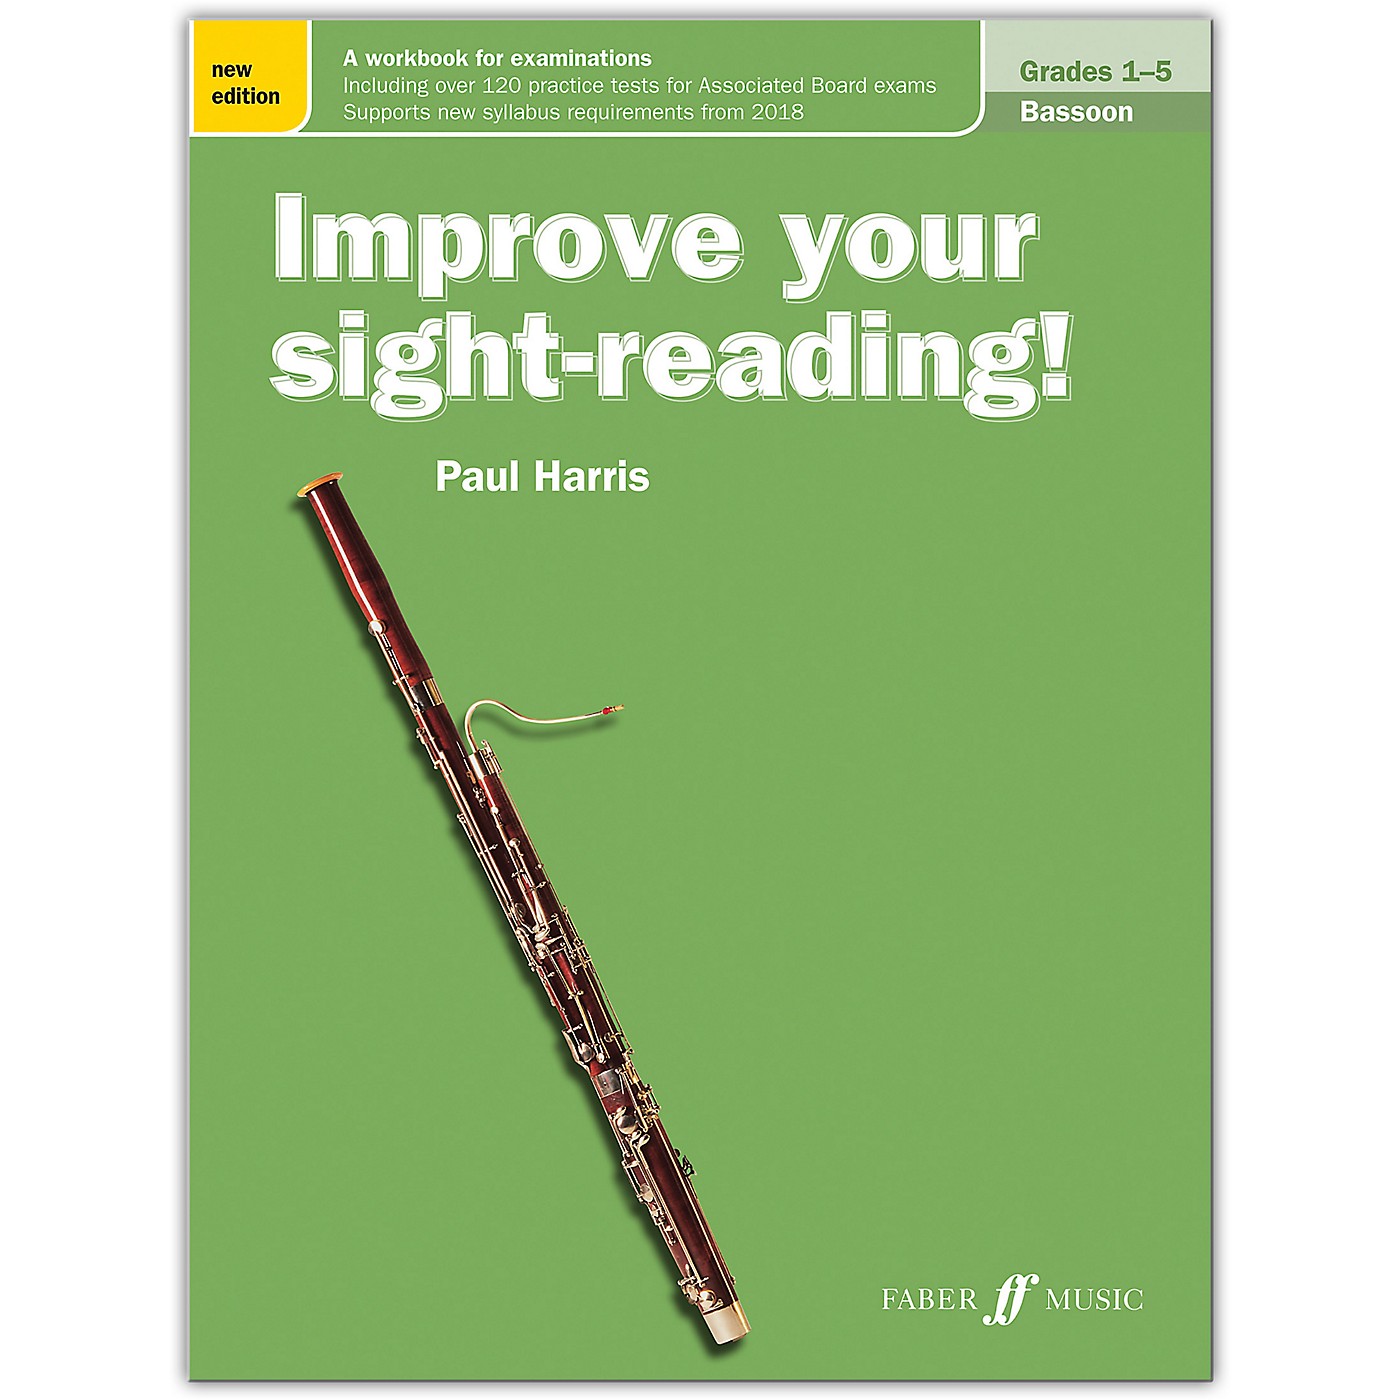 Faber Music LTD Improve Your Sight-Reading! Bassoon, Grade 1-5 (New Edition) thumbnail